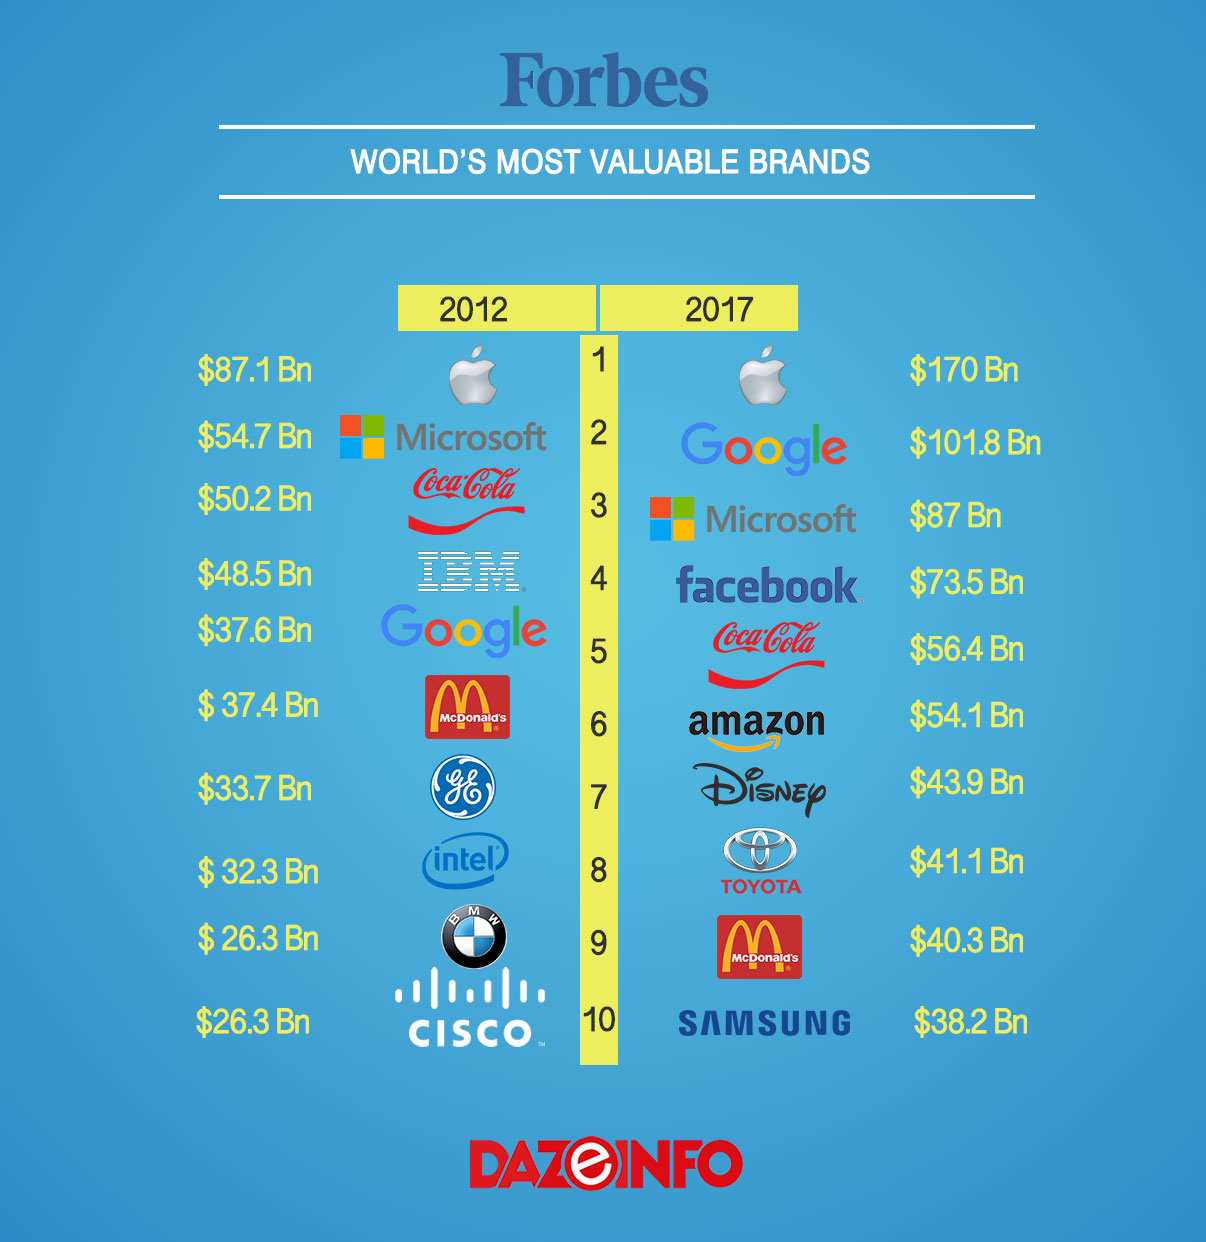 world's-most-valuable-brands-2017-vs-2012-forbes